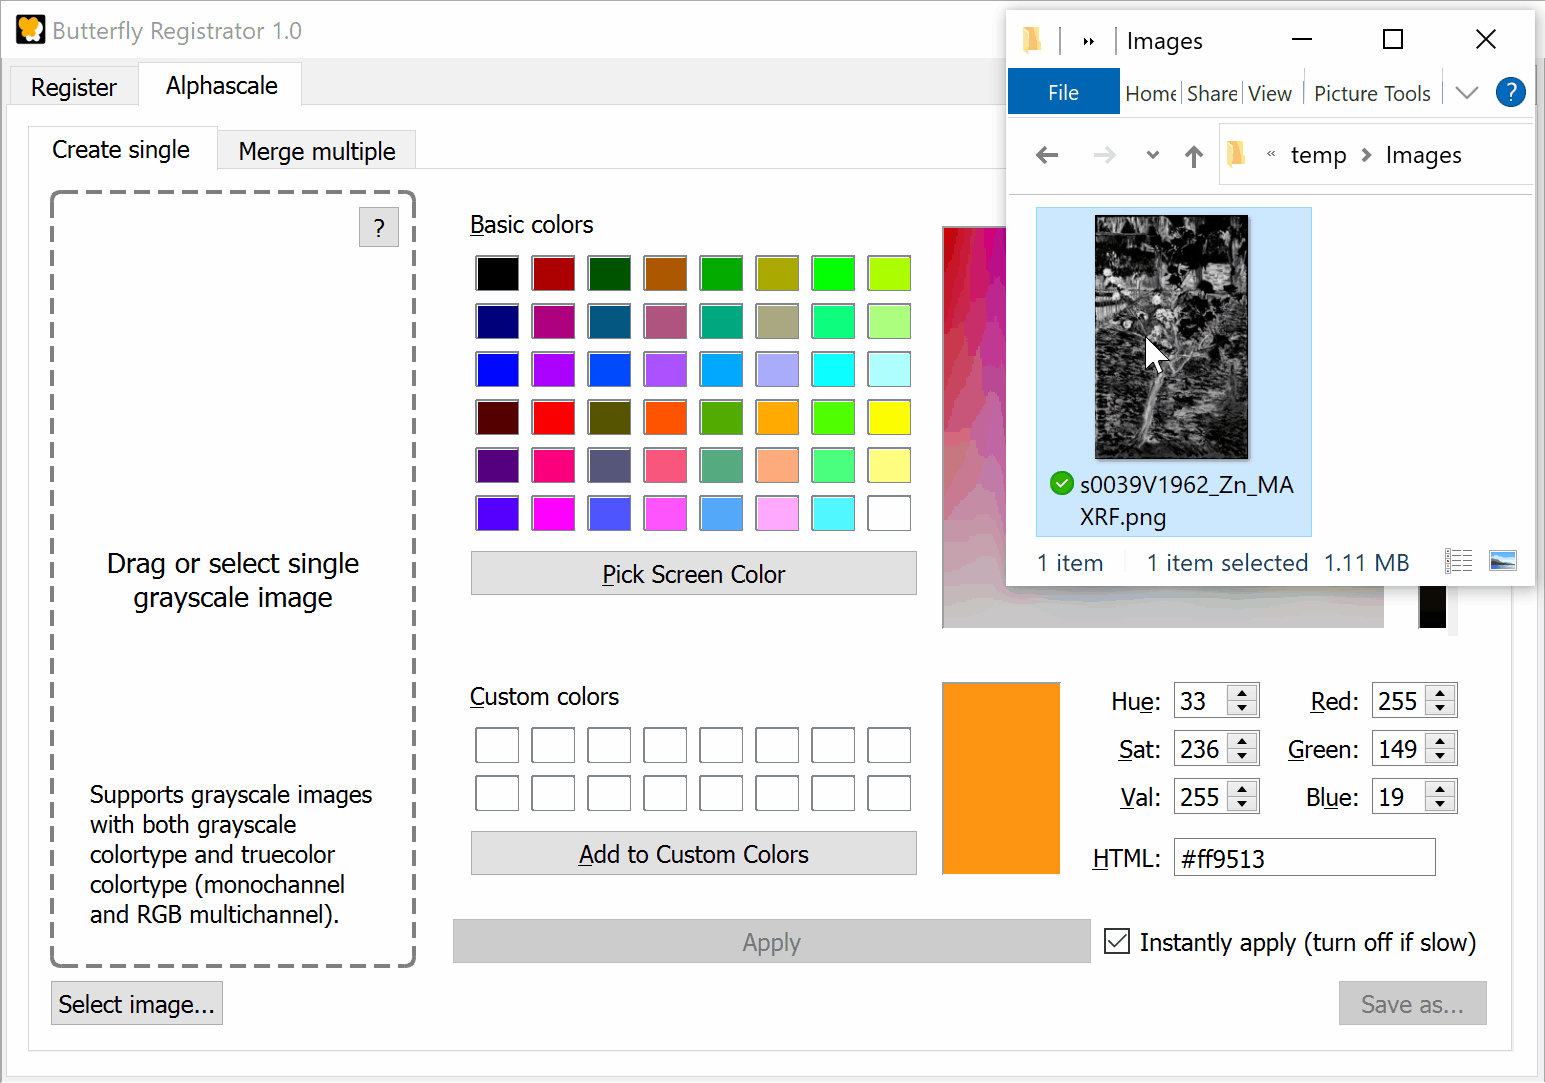 Animated screencapture of the Butterfly Registrator showing an XRF map dragged into the alphascale converter, the color picker selector being changed, and the save alphascale shown in the Butterfly Viewer.